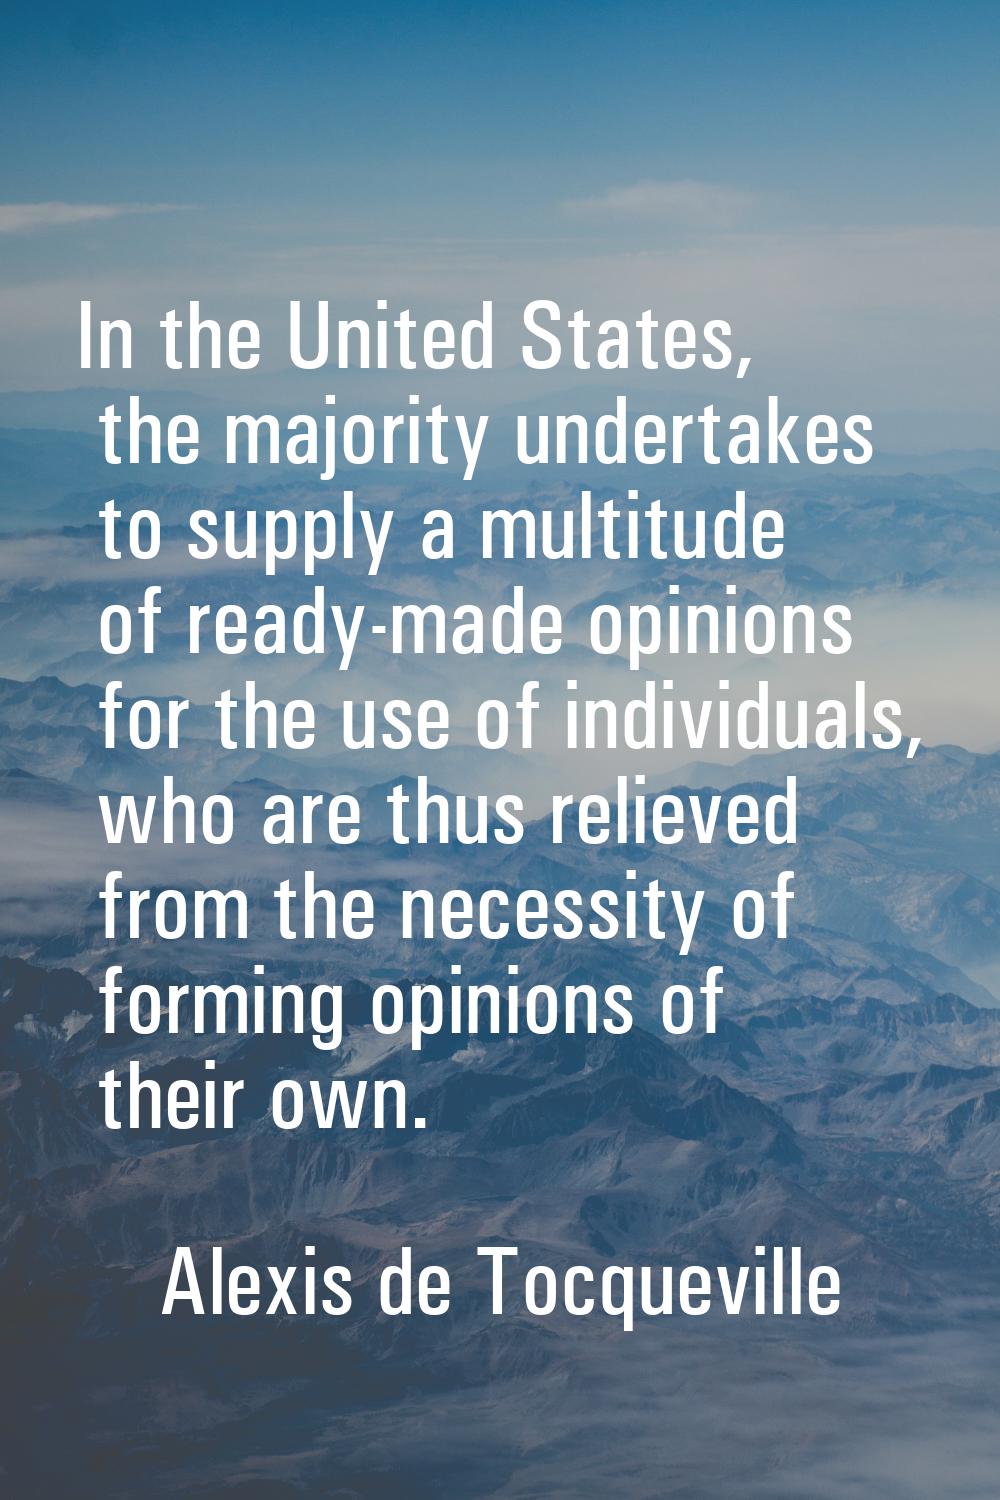 In the United States, the majority undertakes to supply a multitude of ready-made opinions for the 